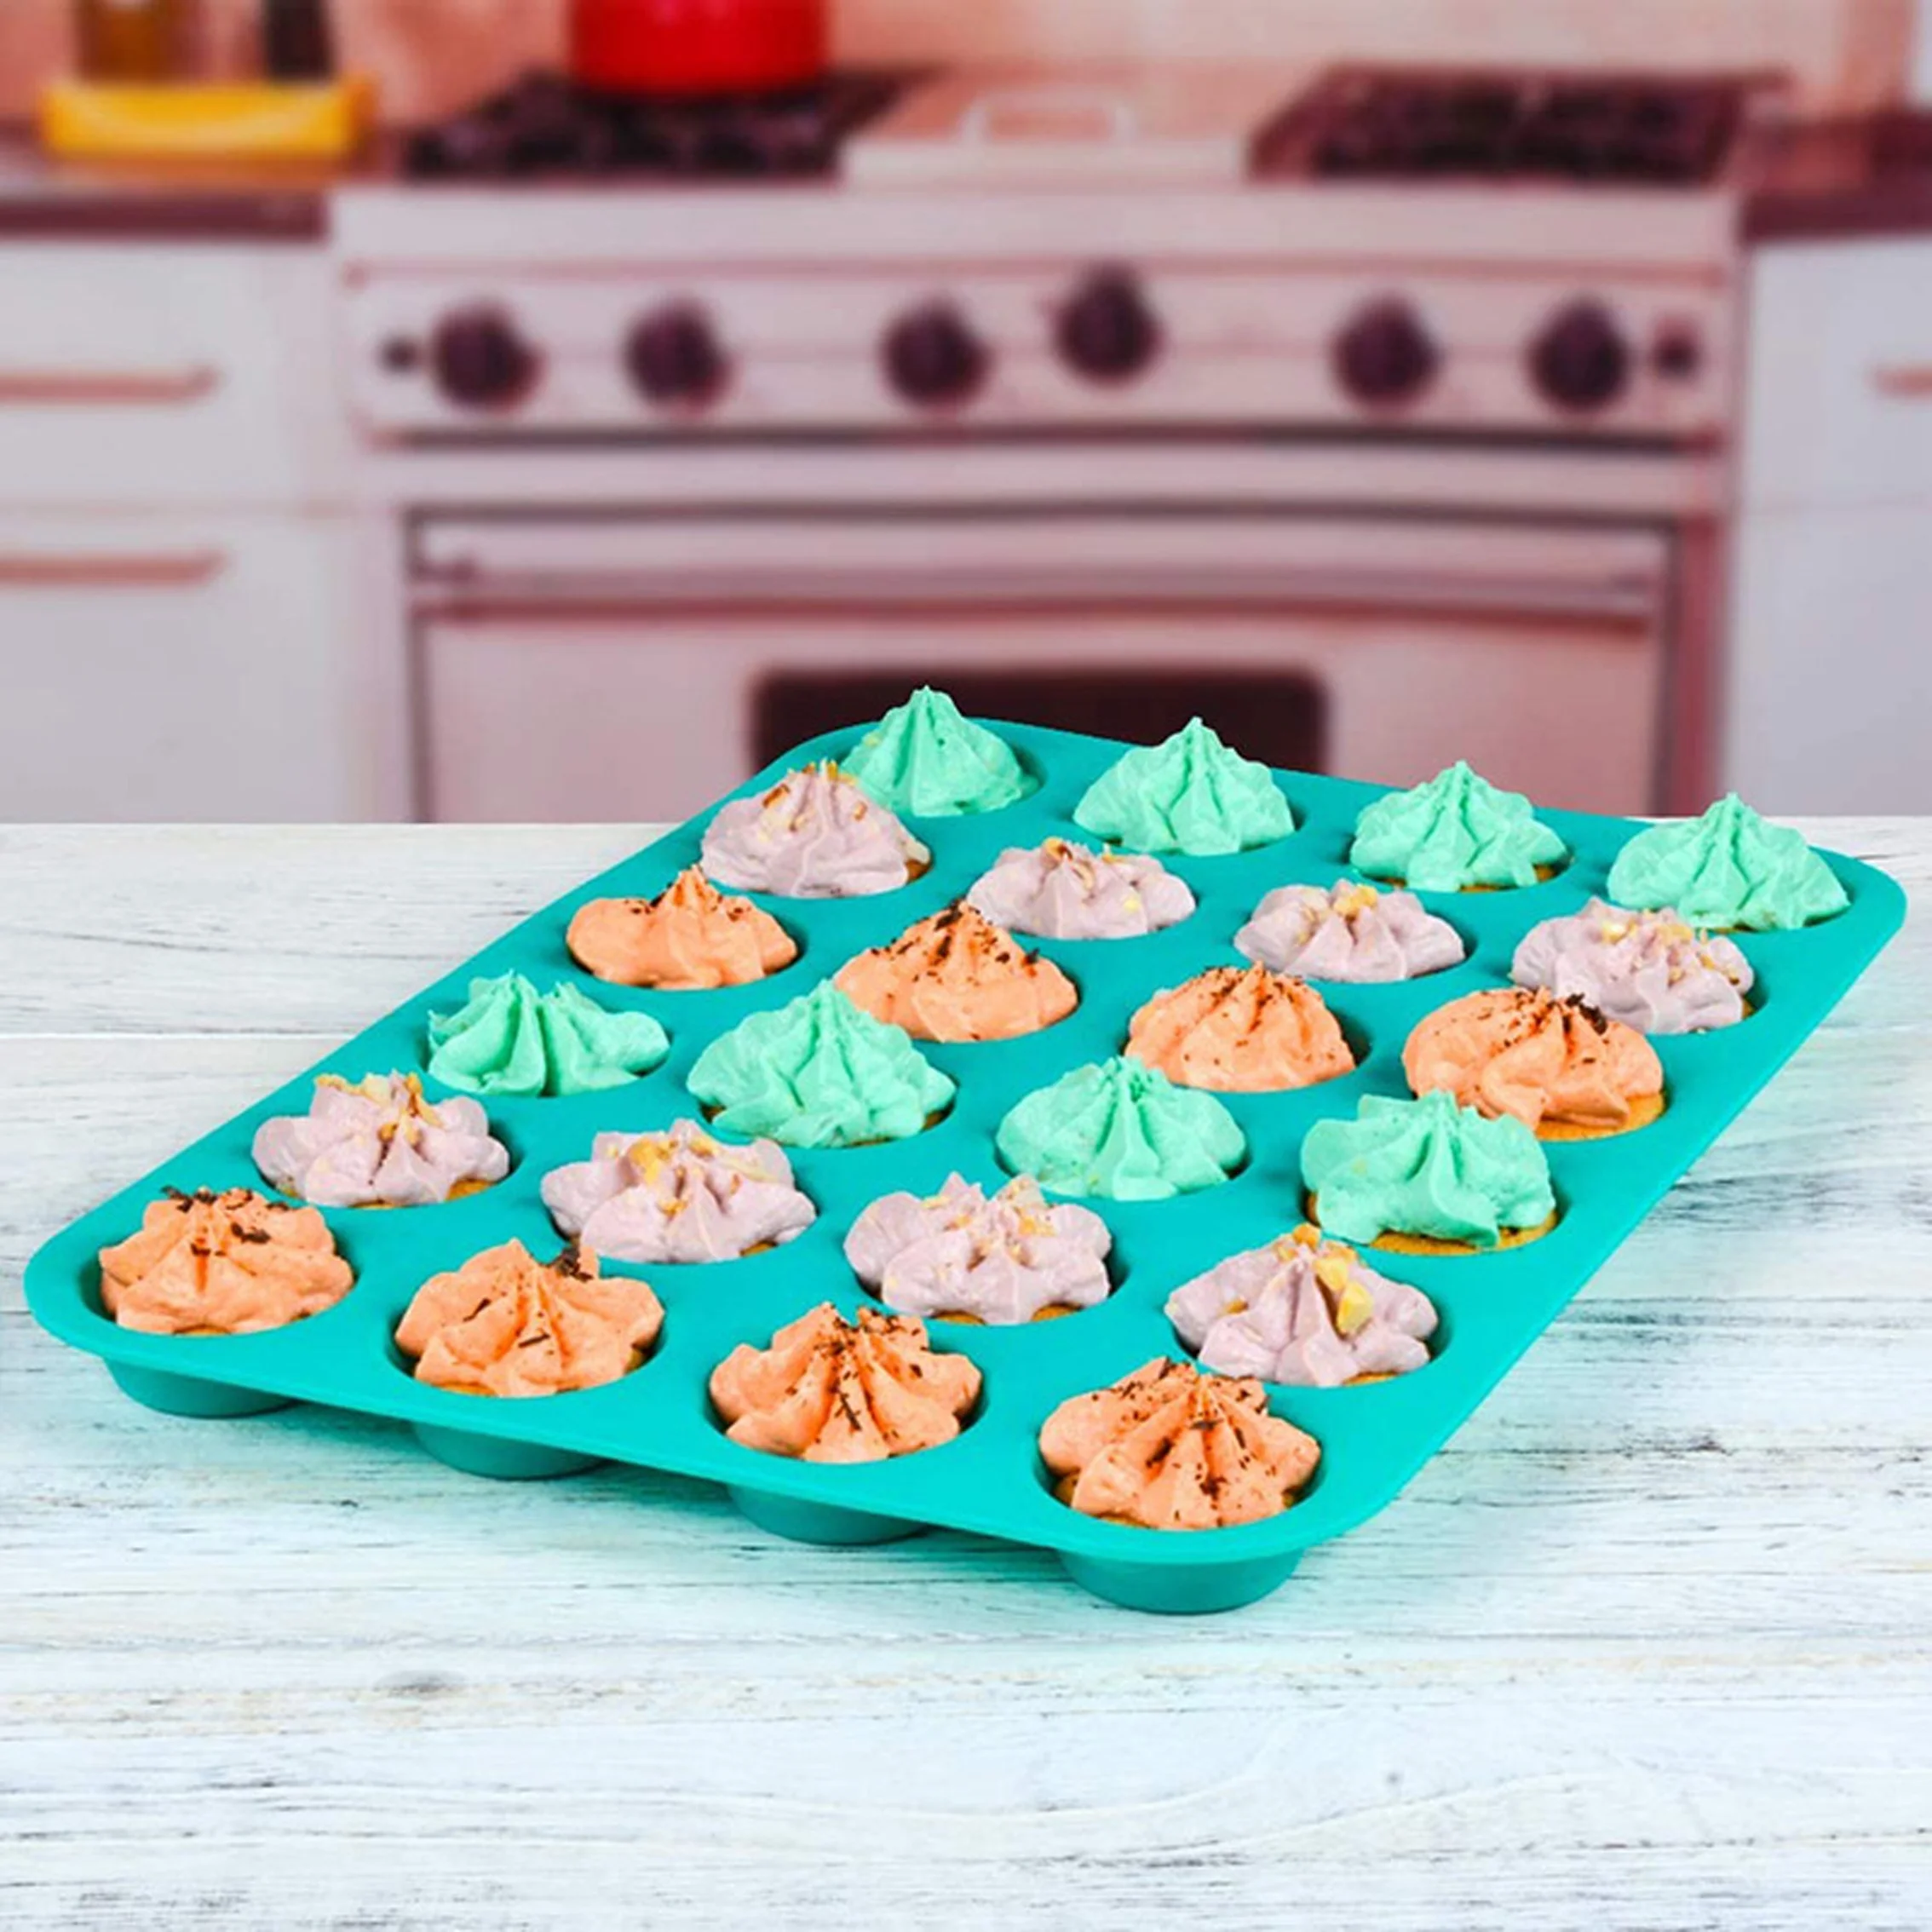 High Quality Thicken 24 Hole Round Silicone Mold Handmade Soap Mold Muffin Cup Cookie Mold Baking Tray For Cupcakes